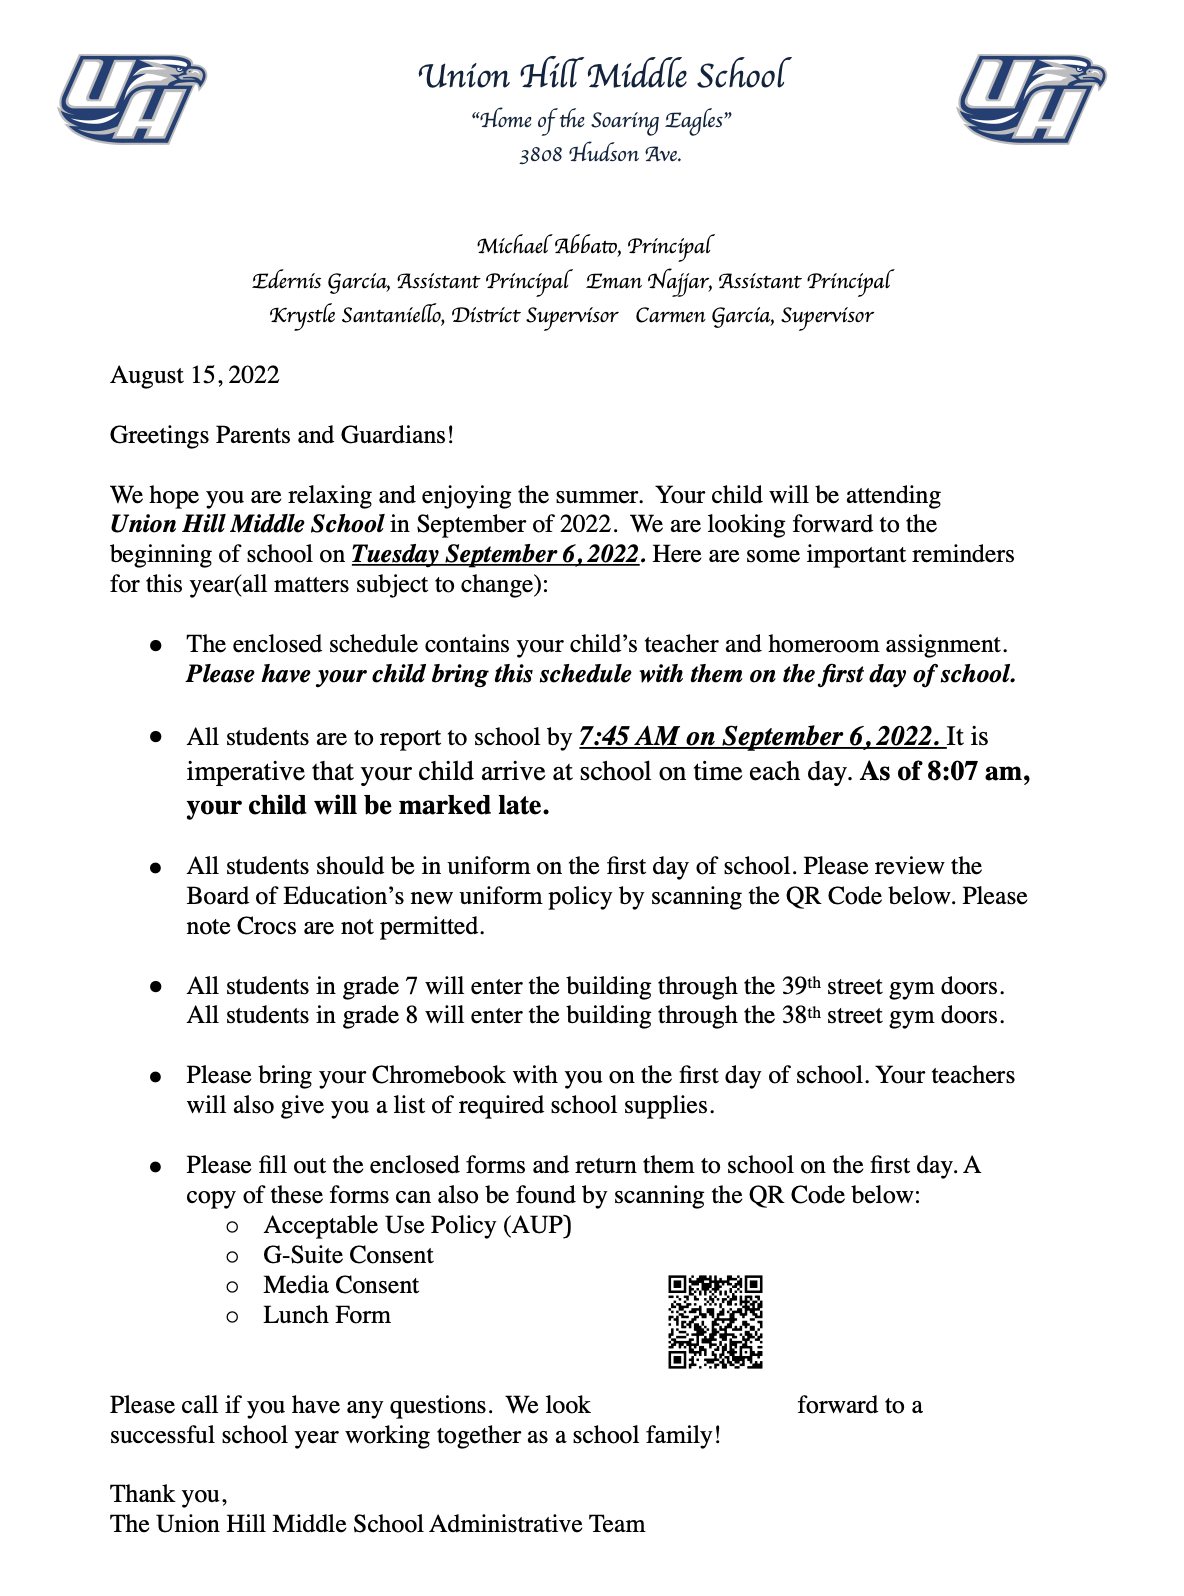 Opening Day Letter-Union Hill Middle School-English